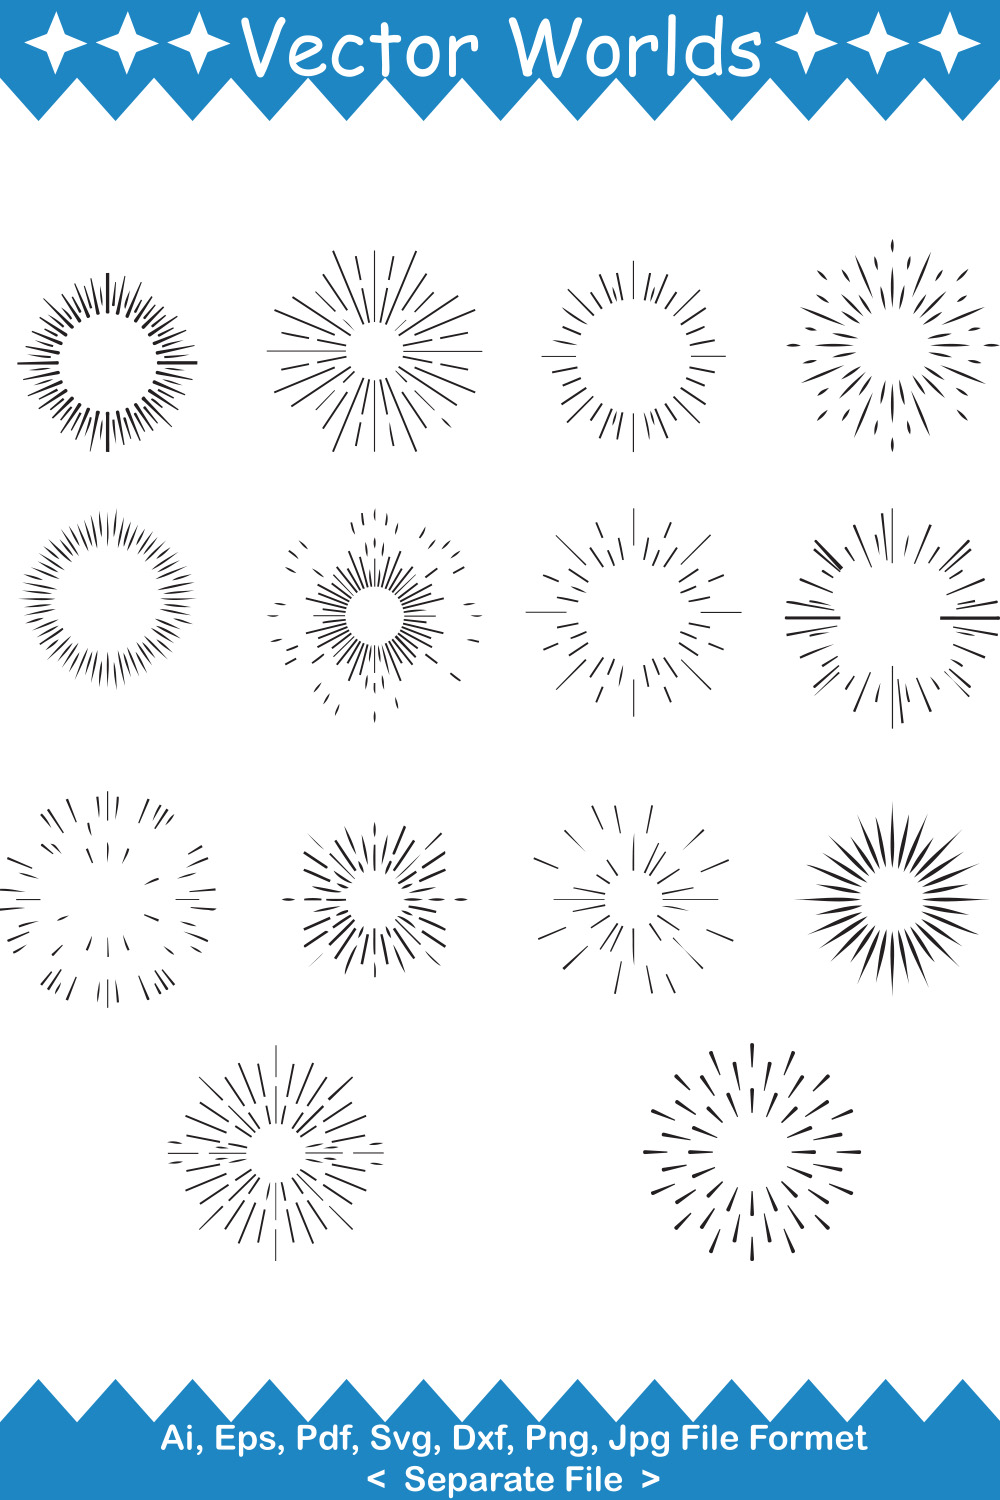 Collection of vector irresistible images of sunburst silhouettes.